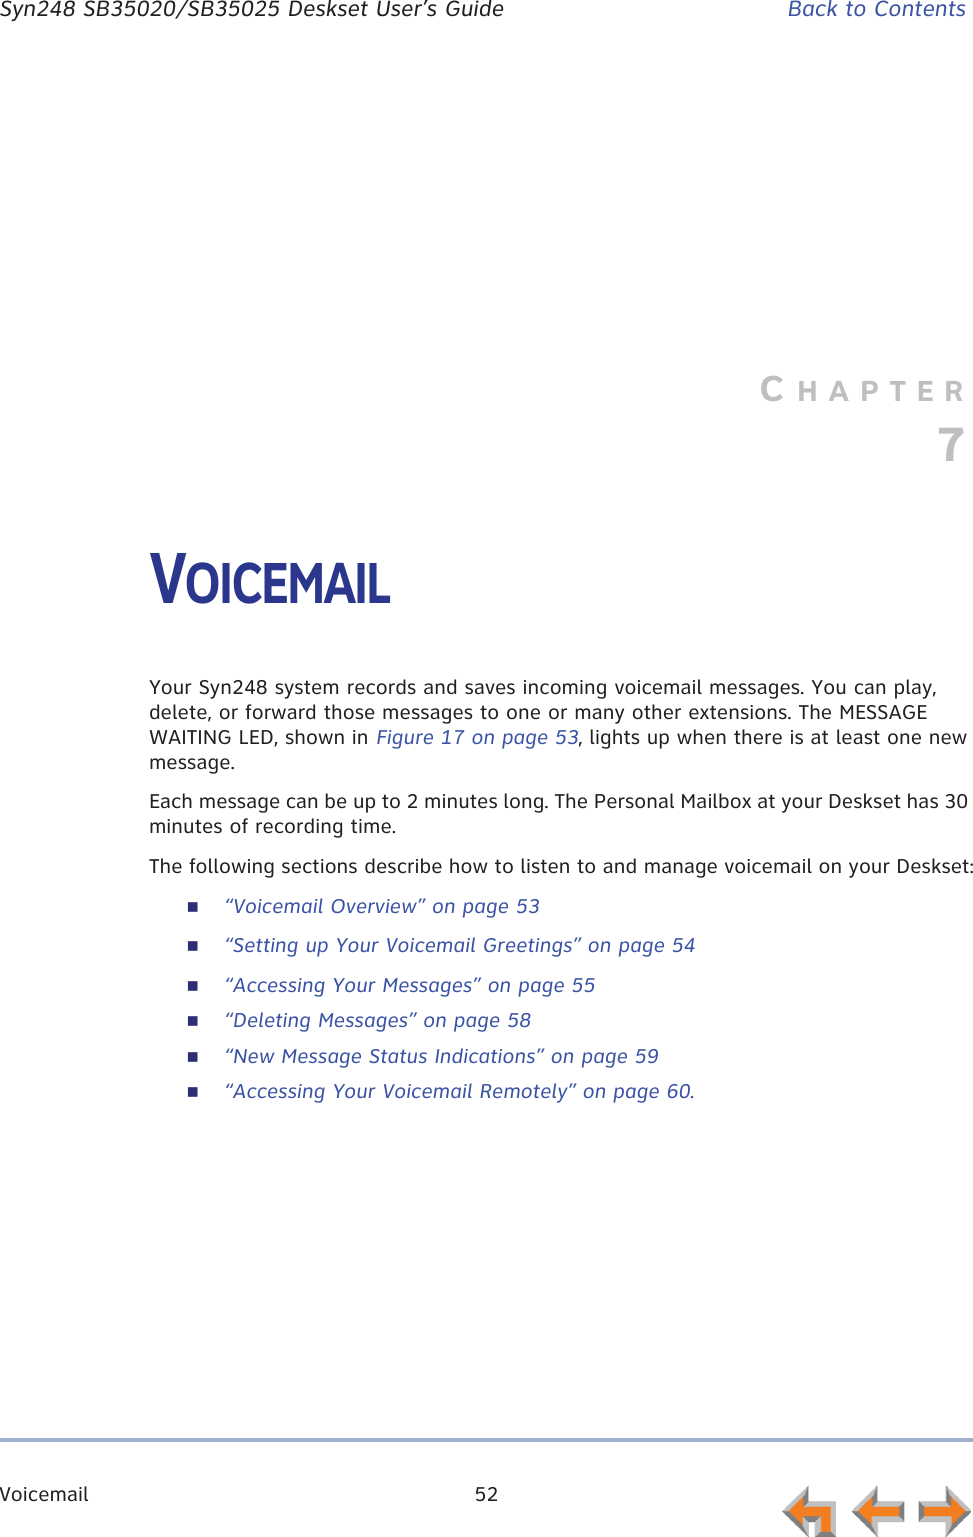 Voicemail 52      Syn248 SB35020/SB35025 Deskset User’s Guide Back to ContentsCHAPTER7VOICEMAILYour Syn248 system records and saves incoming voicemail messages. You can play, delete, or forward those messages to one or many other extensions. The MESSAGE WAITING LED, shown in Figure 17 on page 53, lights up when there is at least one new message.Each message can be up to 2 minutes long. The Personal Mailbox at your Deskset has 30 minutes of recording time.The following sections describe how to listen to and manage voicemail on your Deskset:“Voicemail Overview” on page 53“Setting up Your Voicemail Greetings” on page 54“Accessing Your Messages” on page 55“Deleting Messages” on page 58“New Message Status Indications” on page 59“Accessing Your Voicemail Remotely” on page 60.